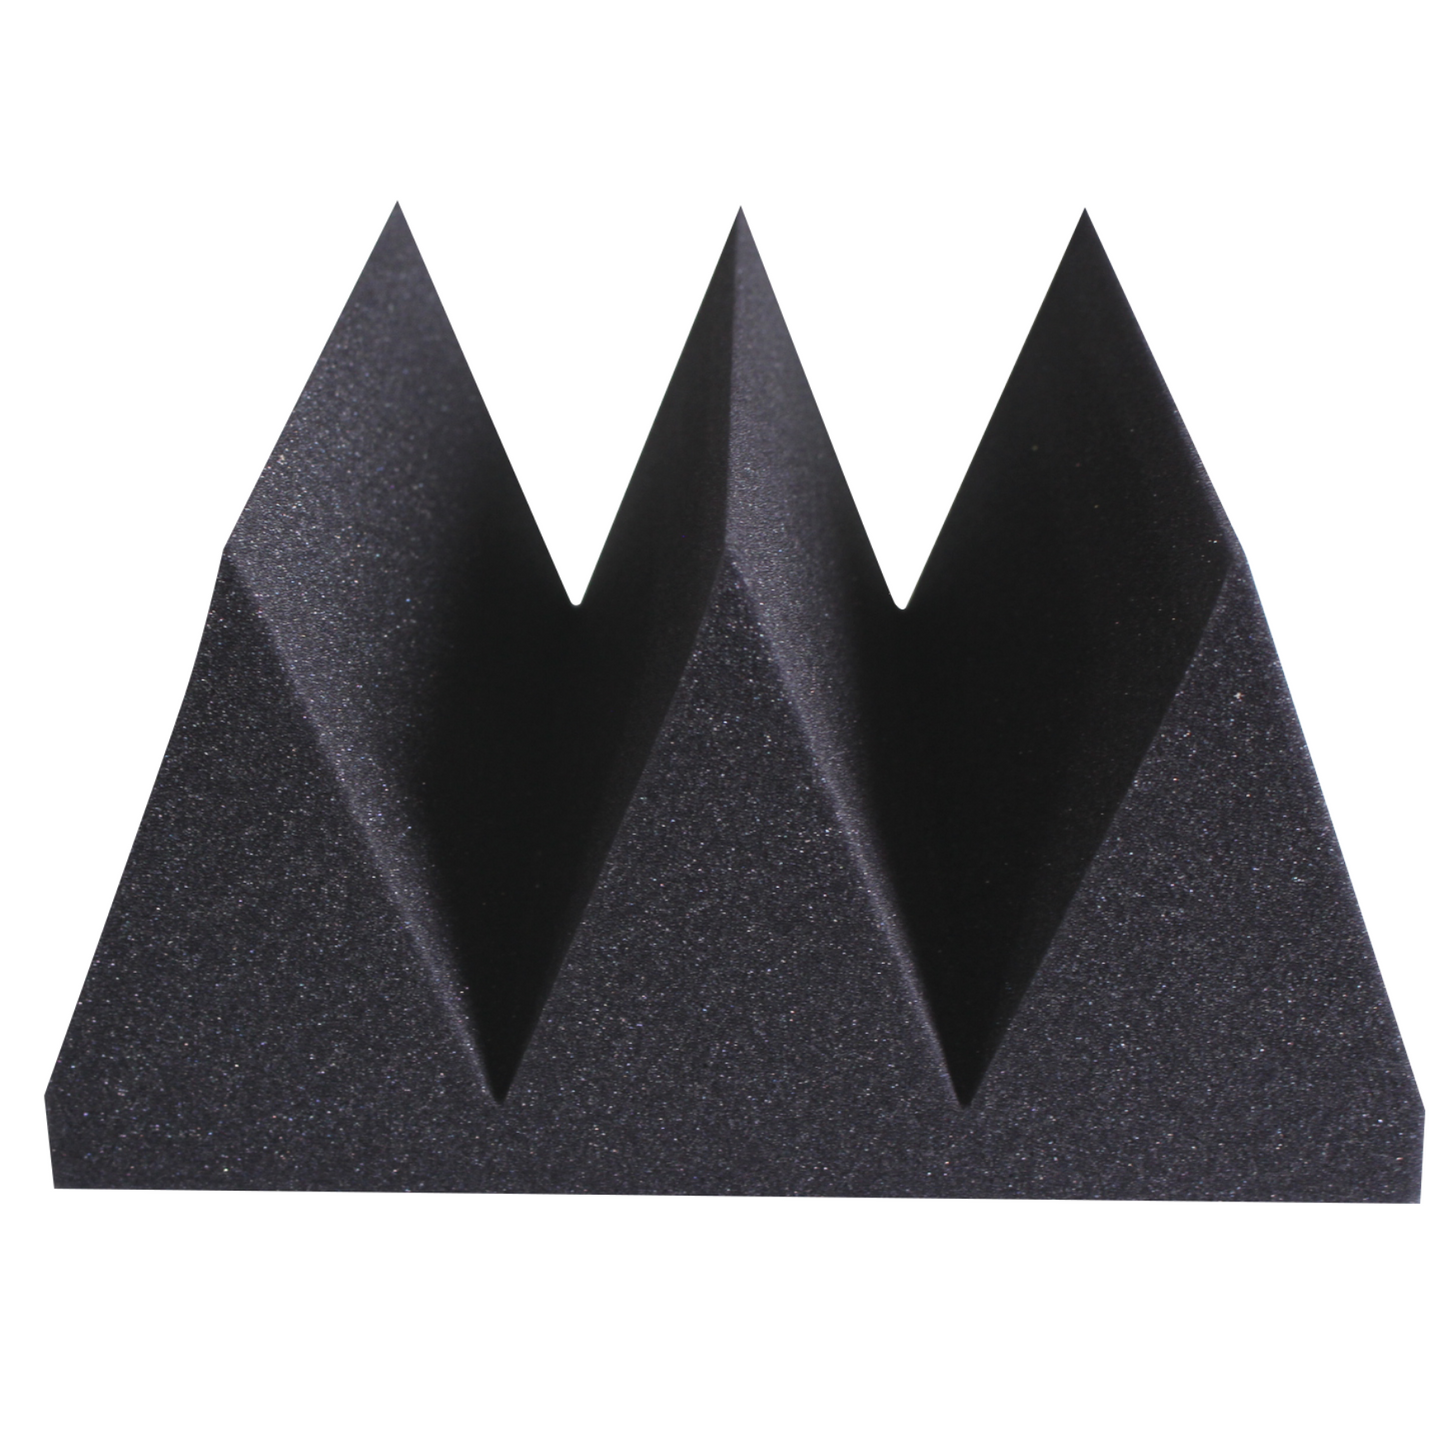 this is a picture of 12 by 12 by 6 inch thick charcoal color acoustic foam panels. The panel has 3 wedges that protrude out to form a nice looking design